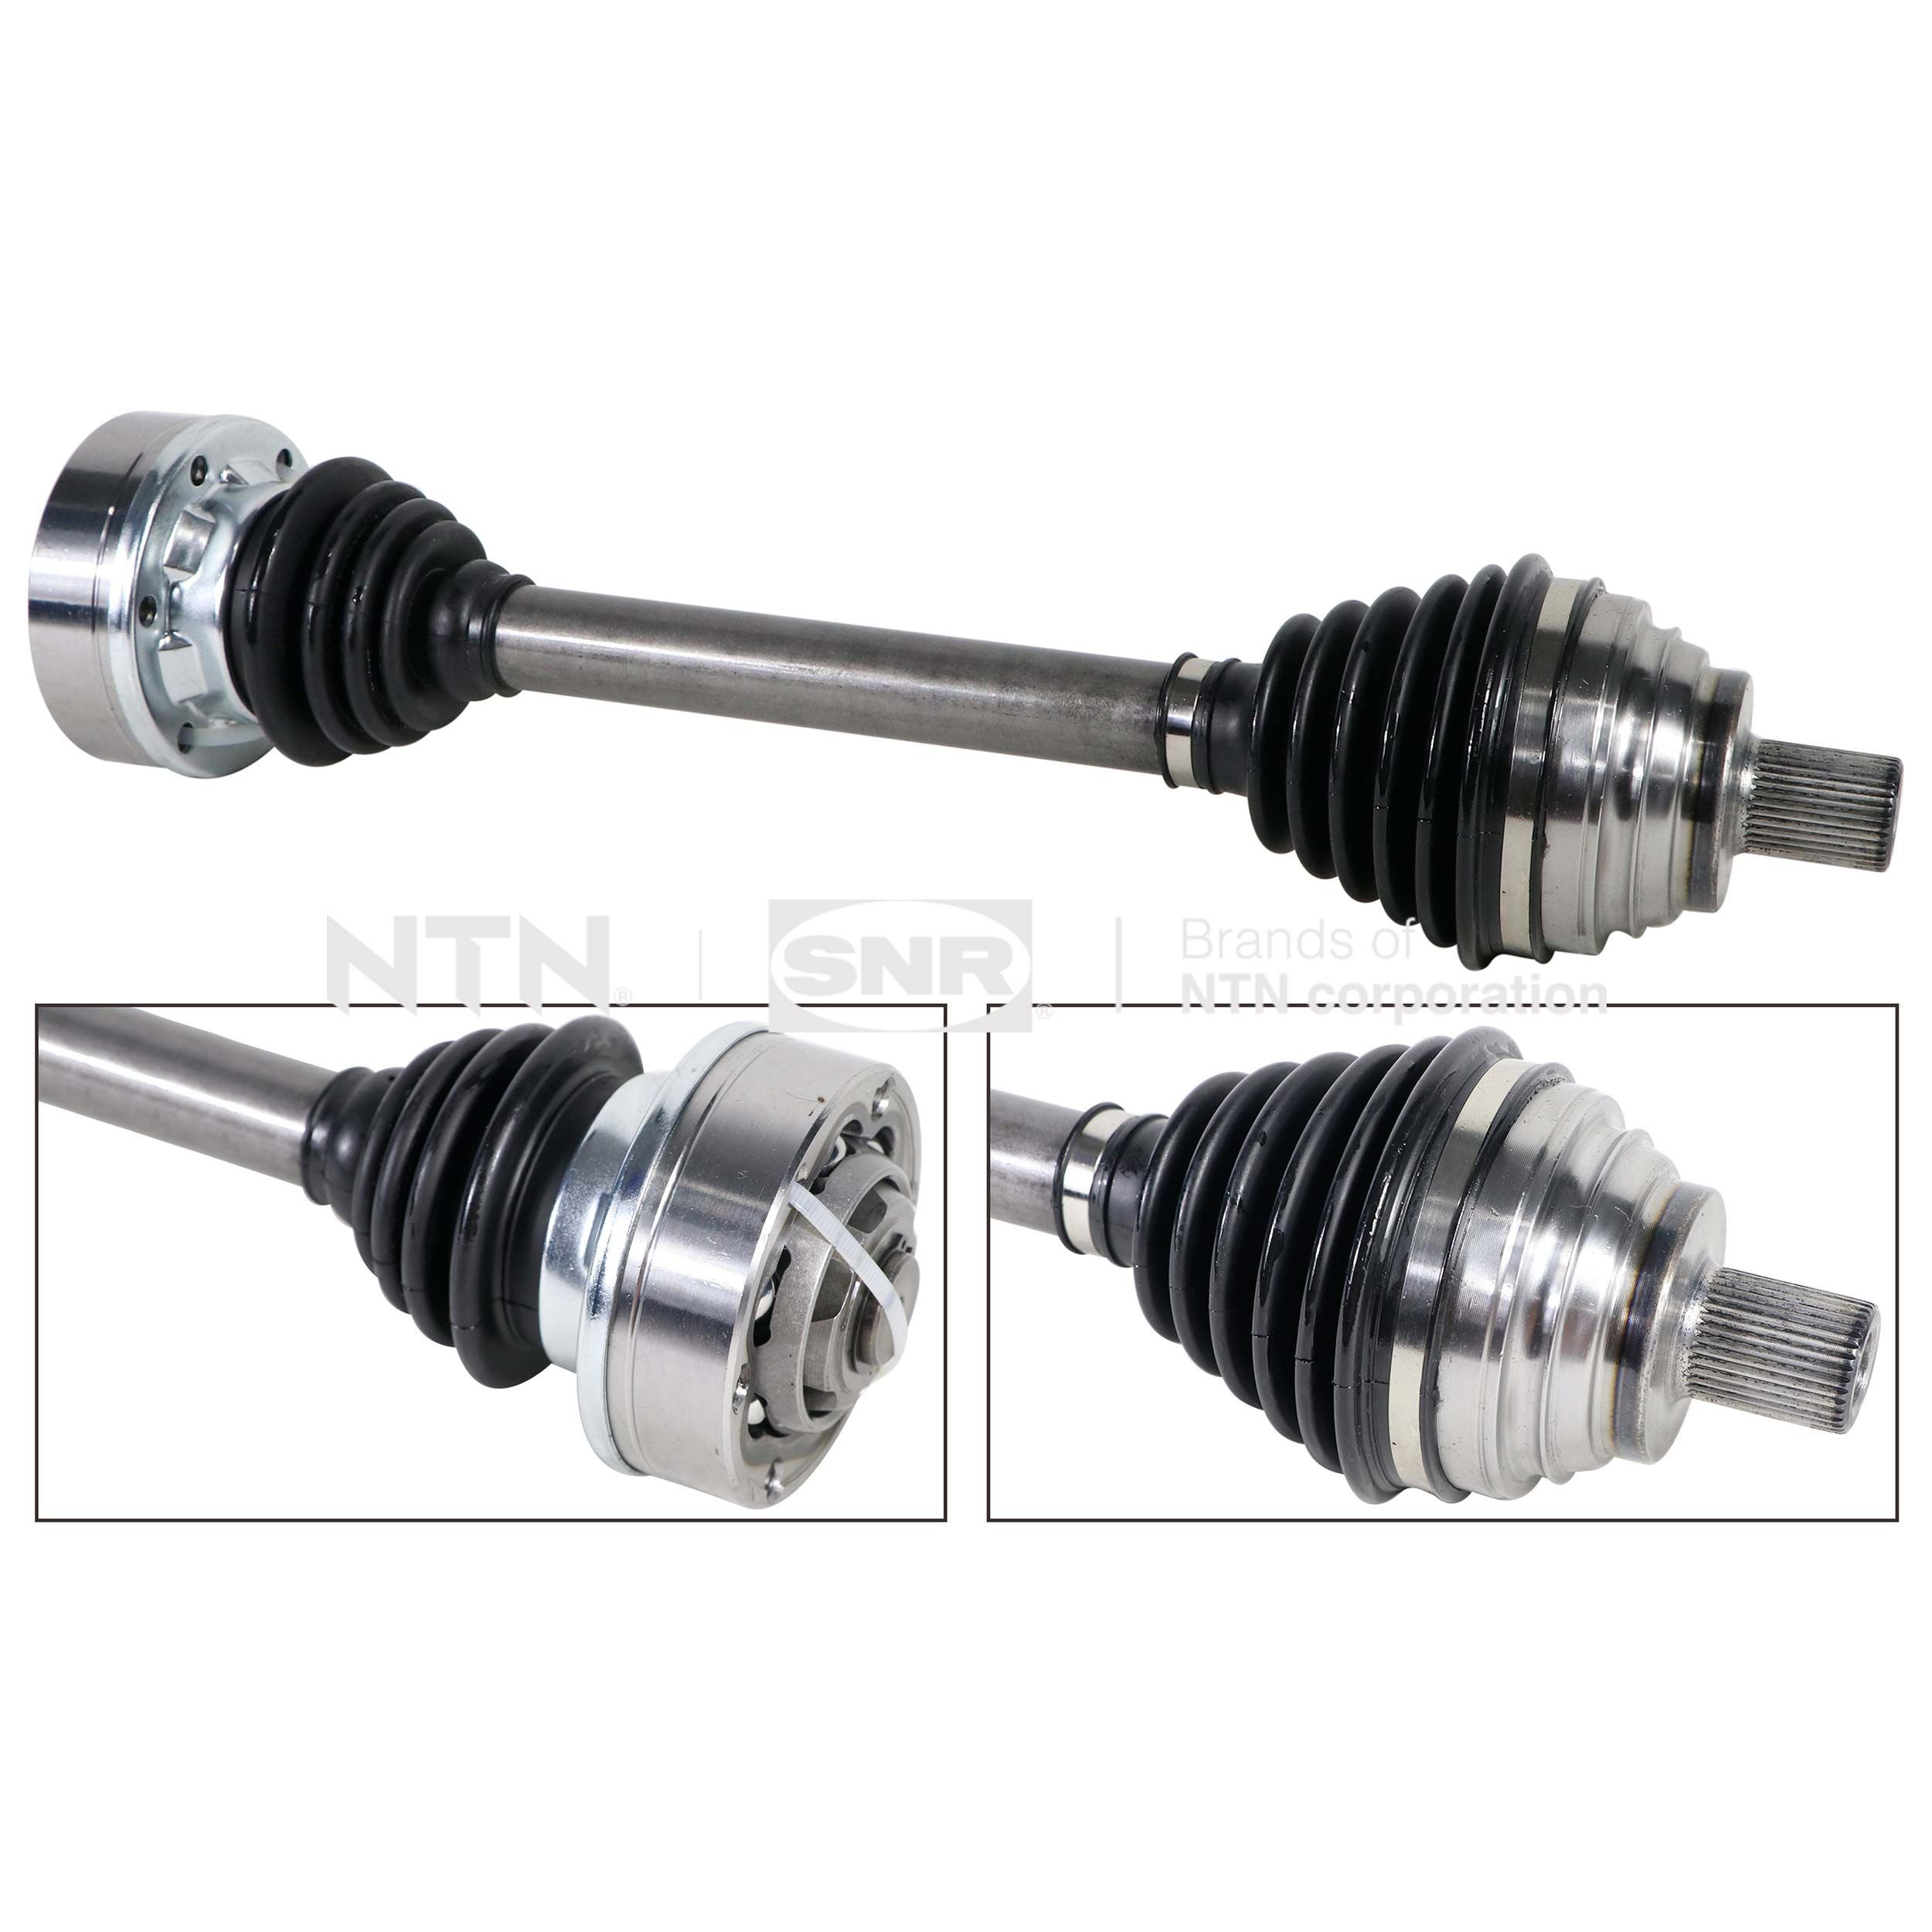 Great value for money - SNR Drive shaft DK54.056